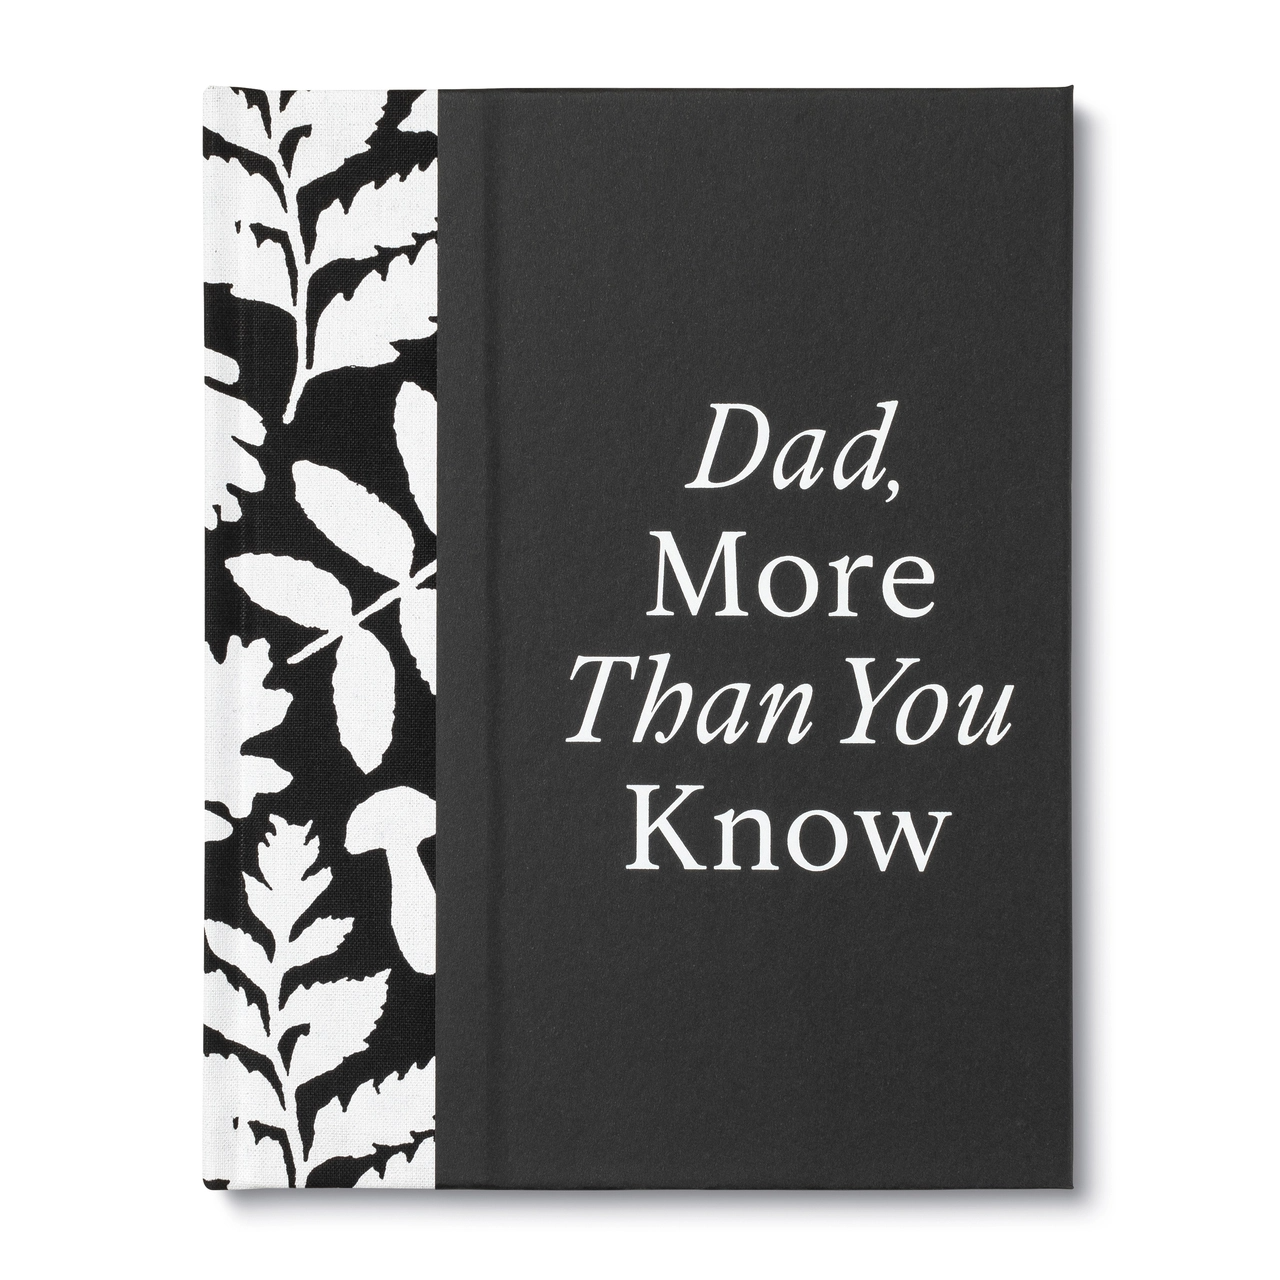 Dad, More Than You Know - Book - Mellow Monkey